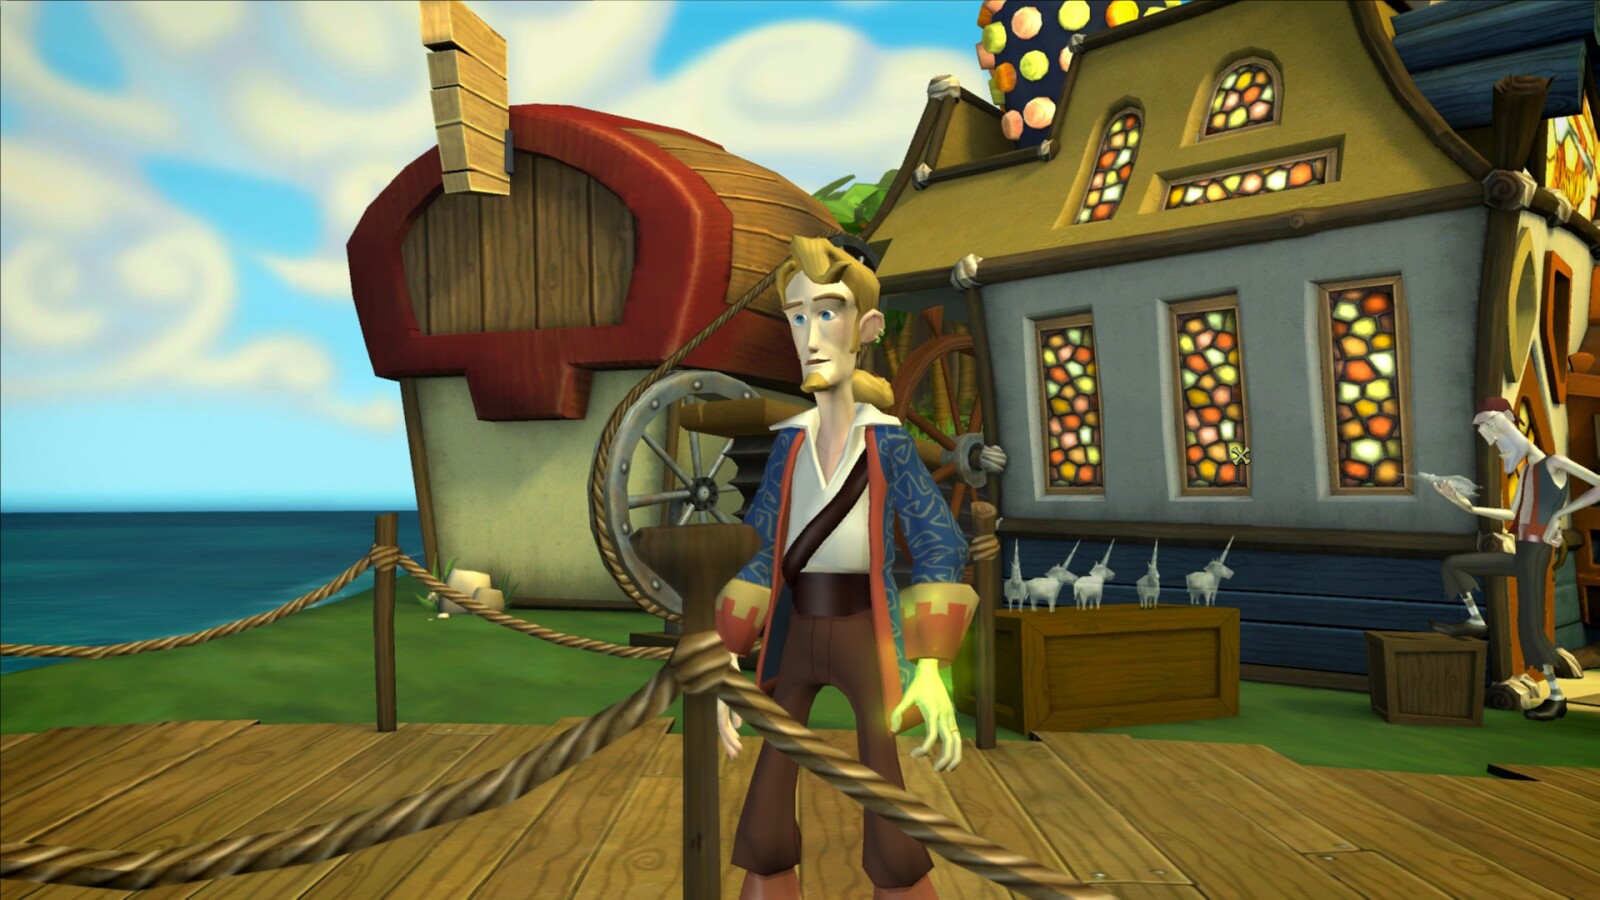 The not great looking 'Tales Of Monkey Island' from Telltale games